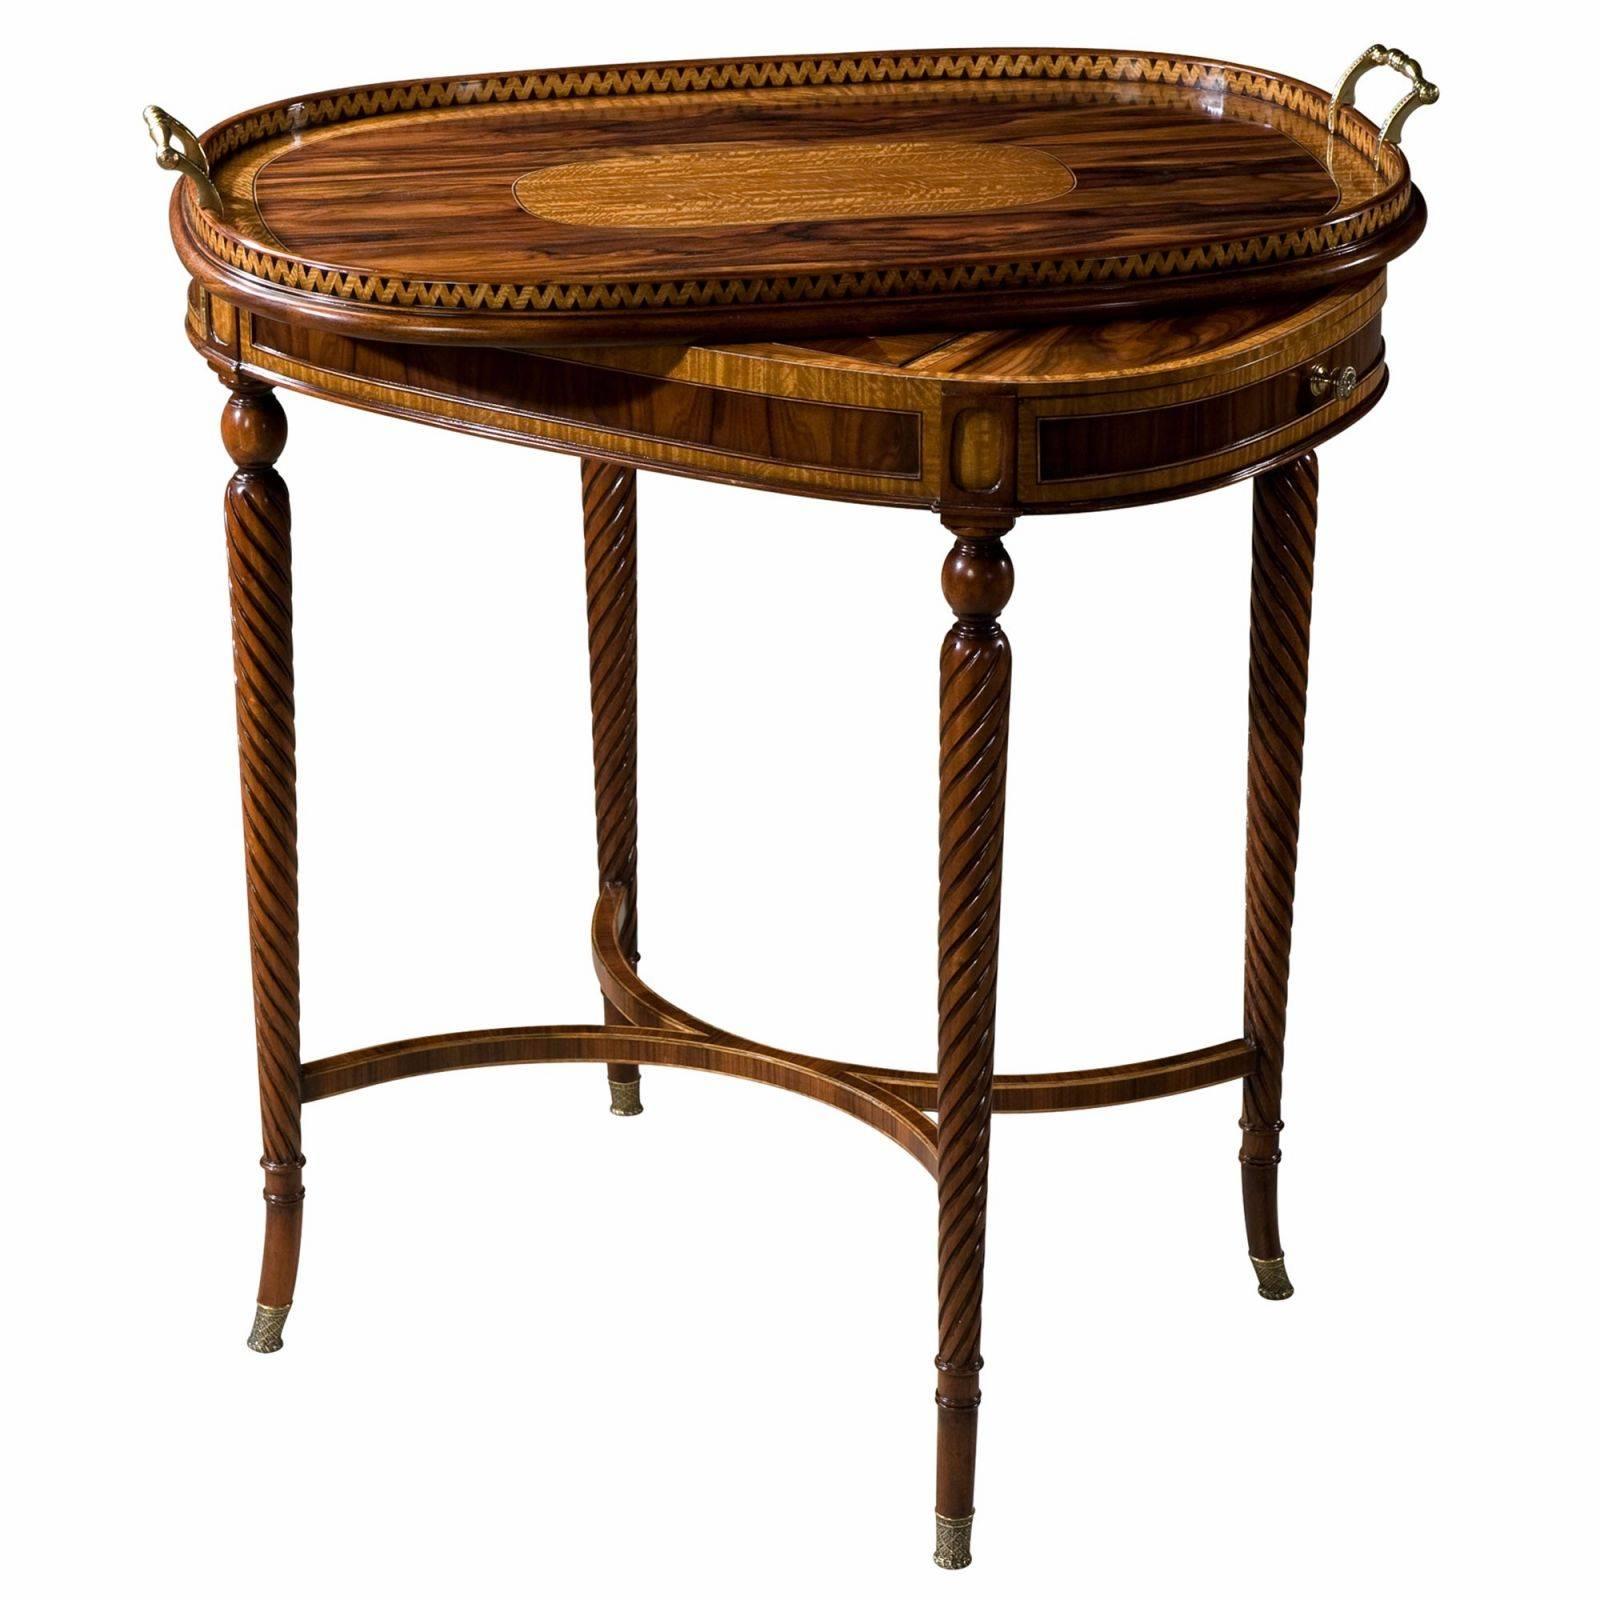 A wild rosewood and satinwood banded tray top table, the oval tray top with a zigzag veneered gallery and brass handles, with a sycamore, rosewood and satinwood chess and backgammon board below and a further leather inlaid backgammon well below, on